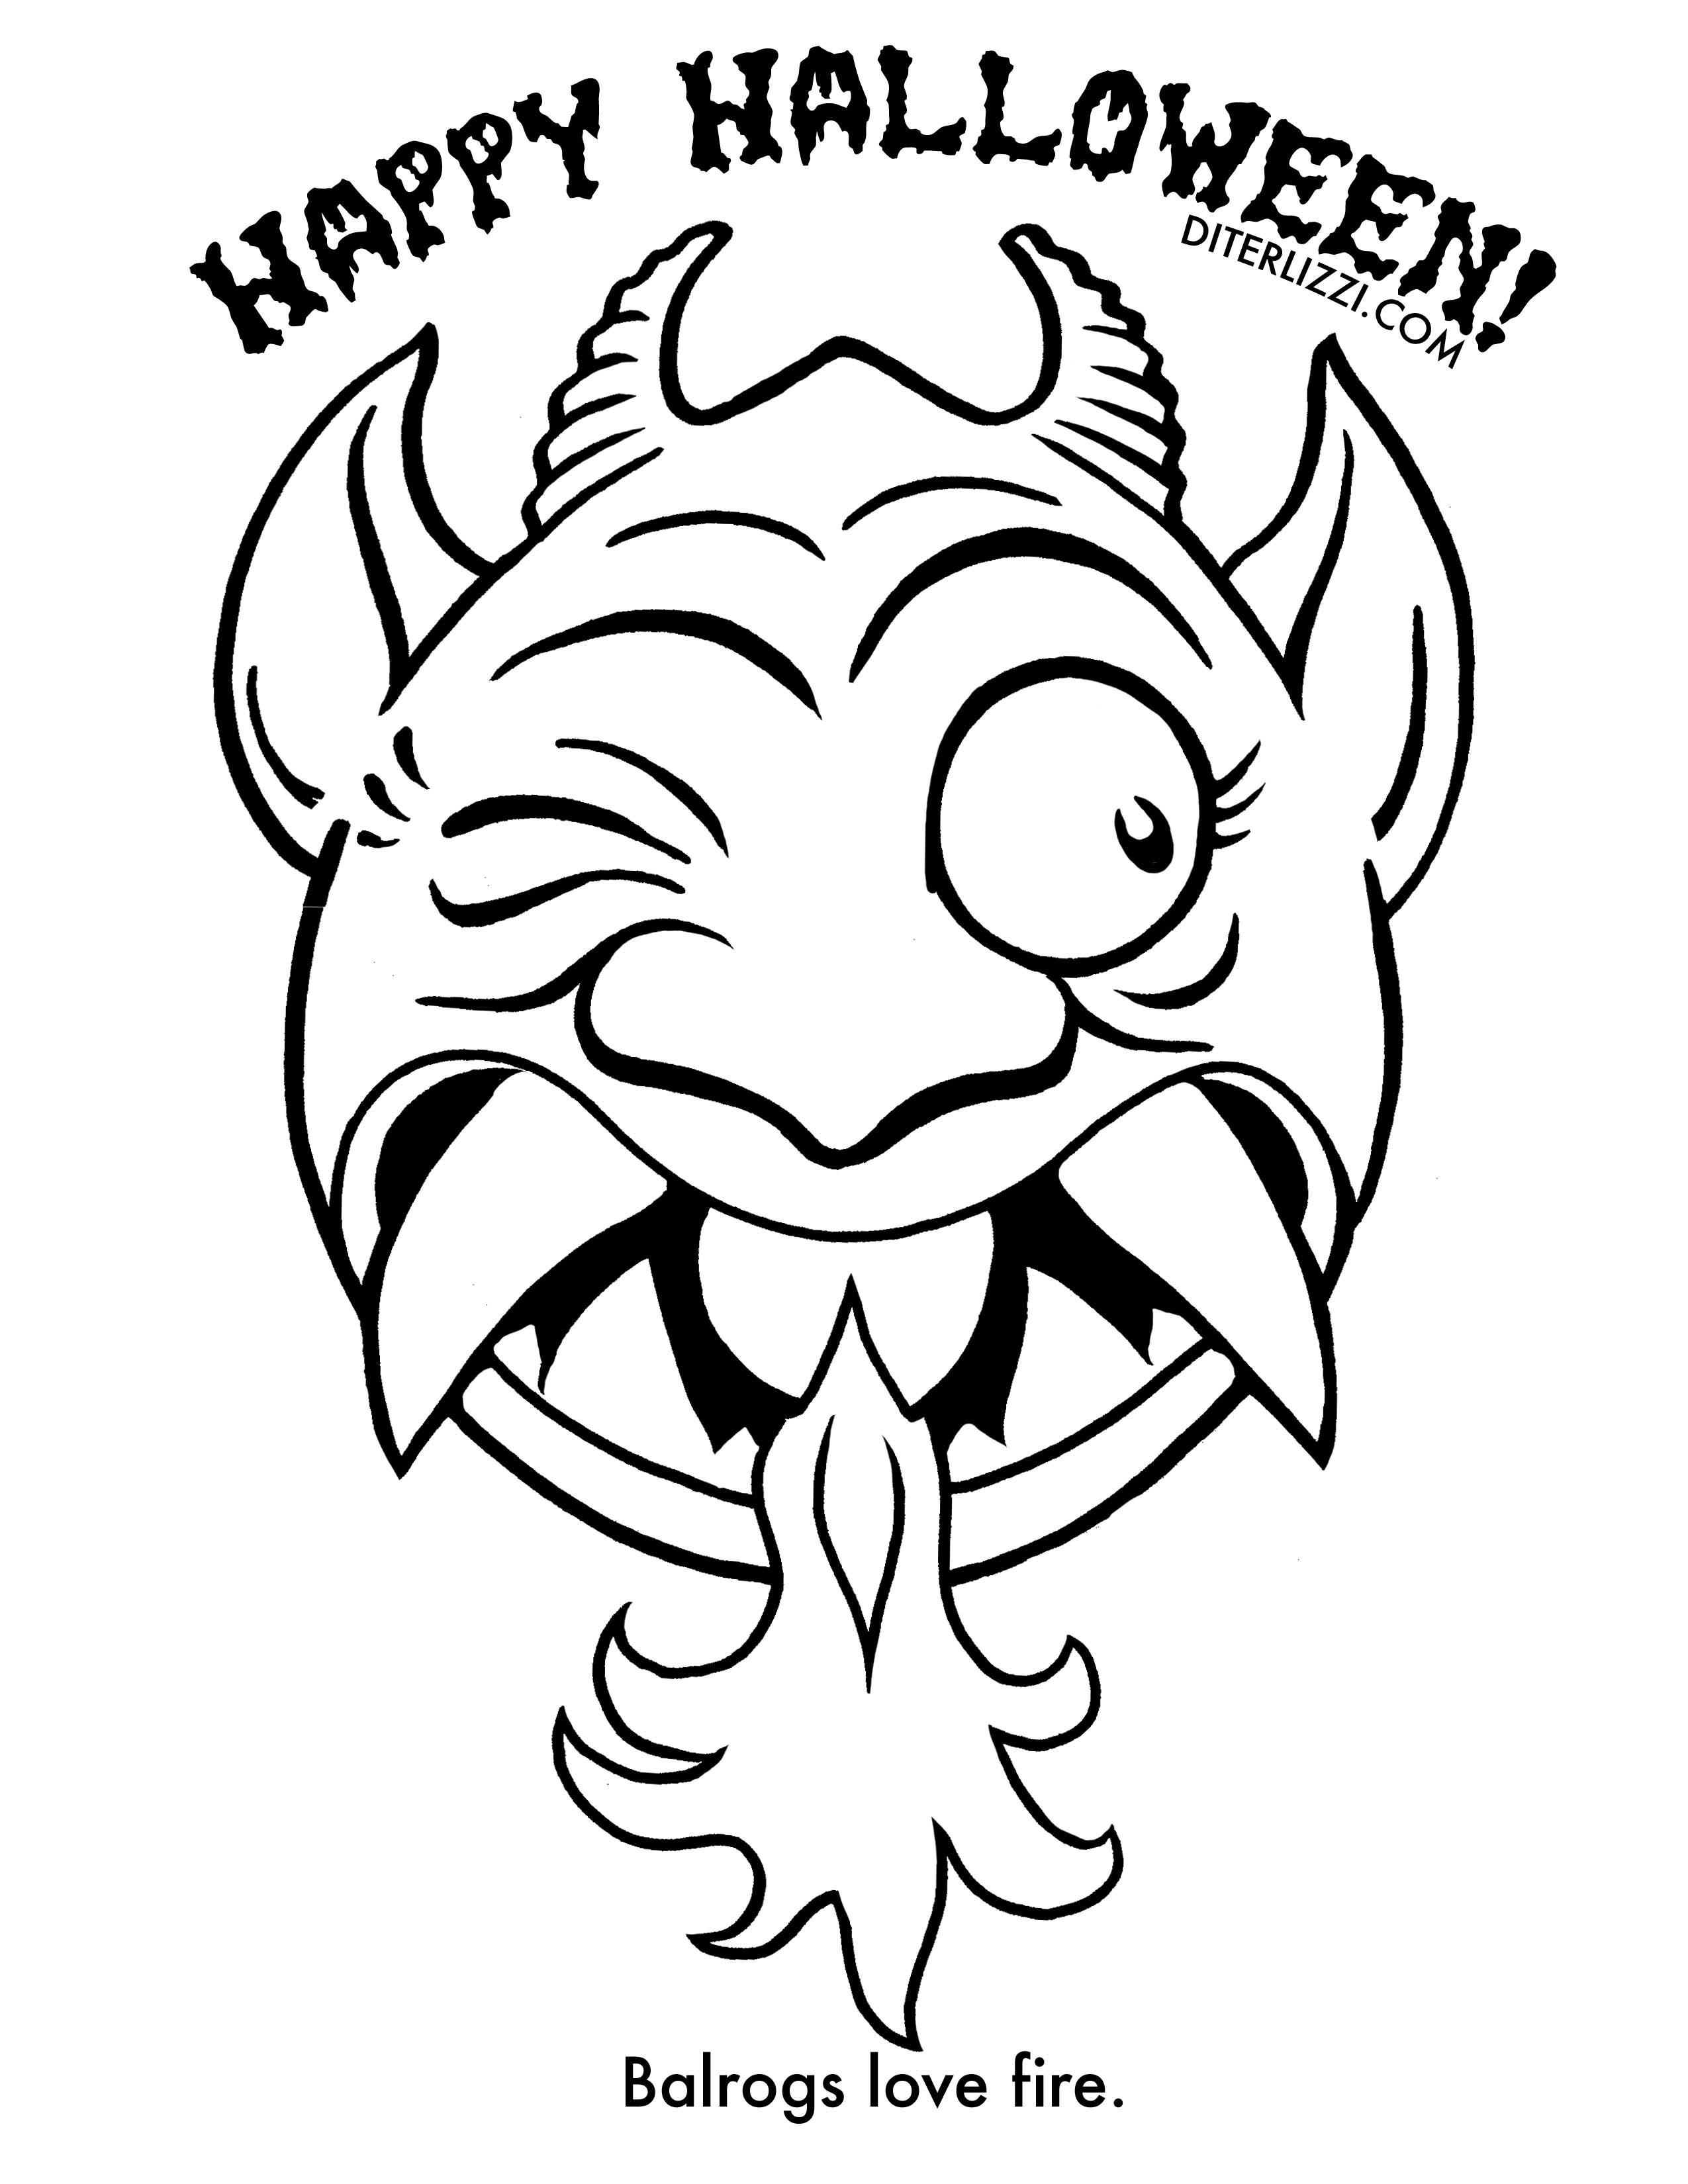 Halloween decorations coloring pages